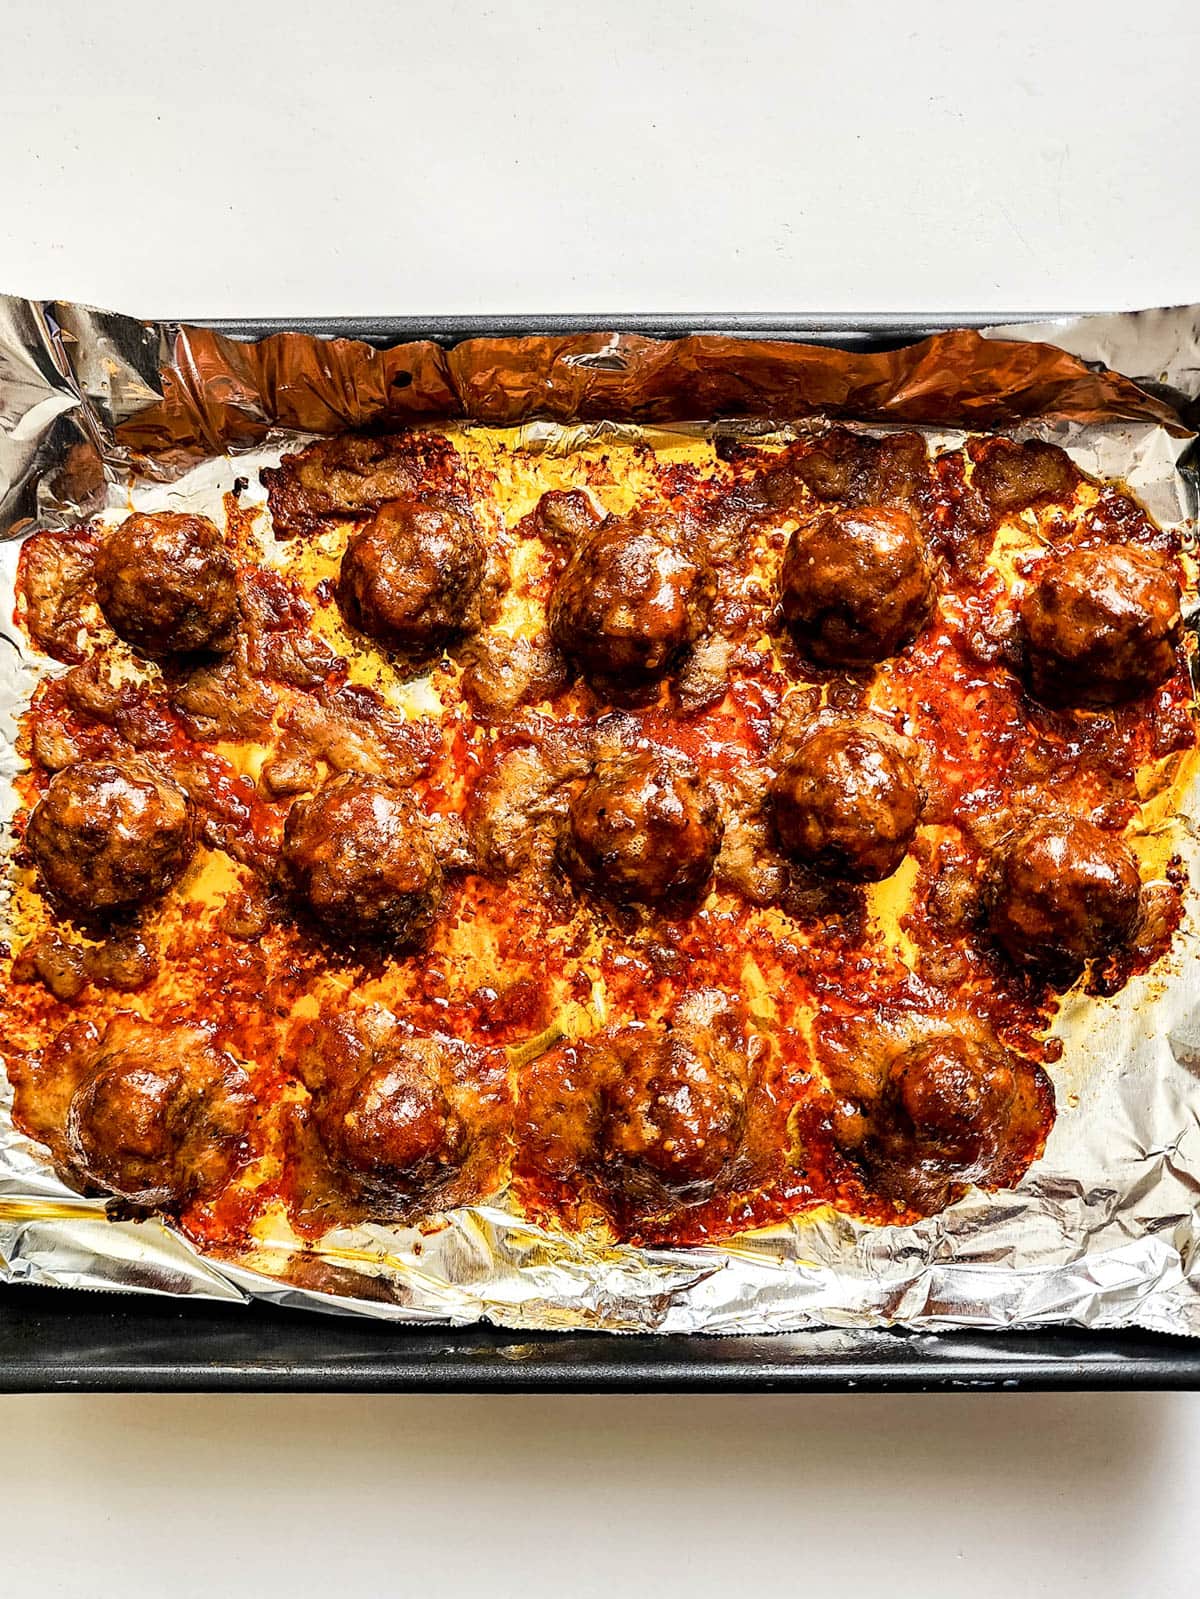 Cooked meatballs on foil covered baking sheet